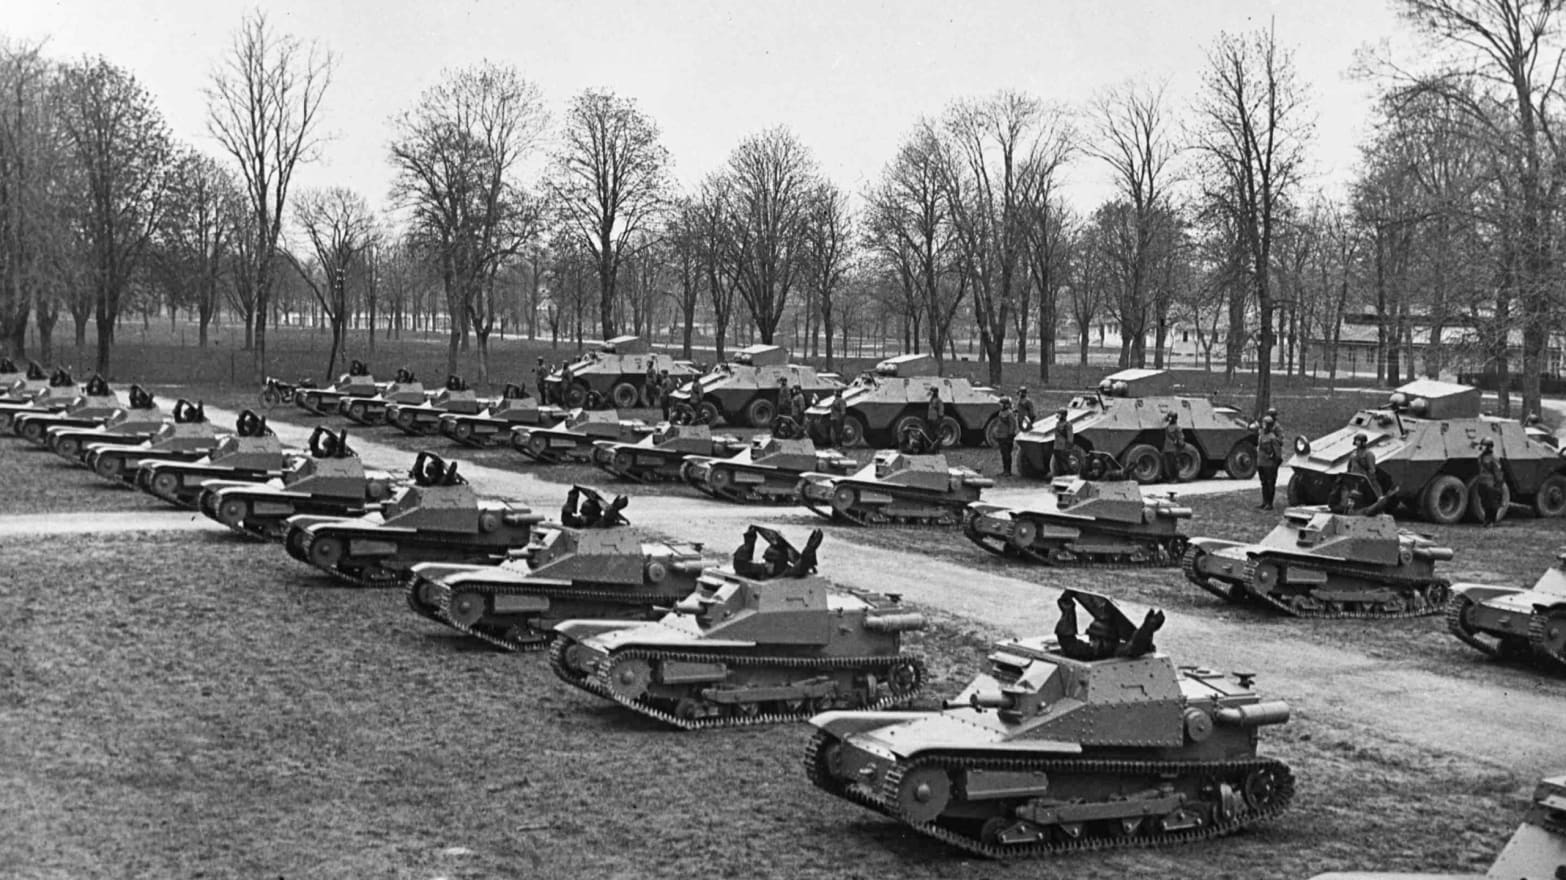 Amazing Story : Of When the US and Germany Fought Together in WW2